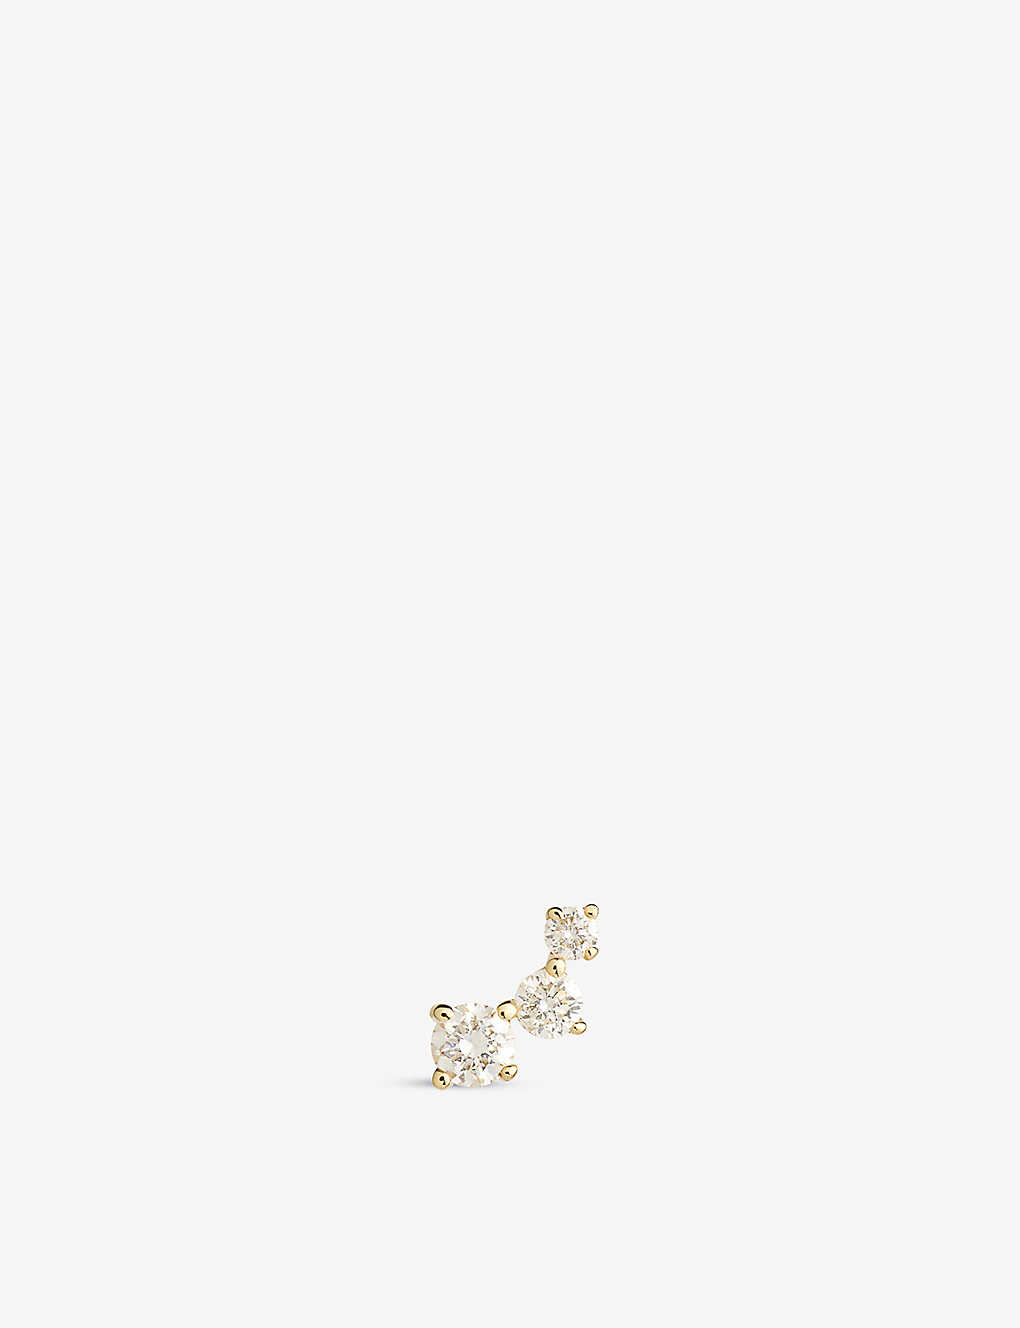 The Alkemistry Ruifier Scintilla Trio Ray 18ct Yellow Gold And 0.07ct Diamond Earring